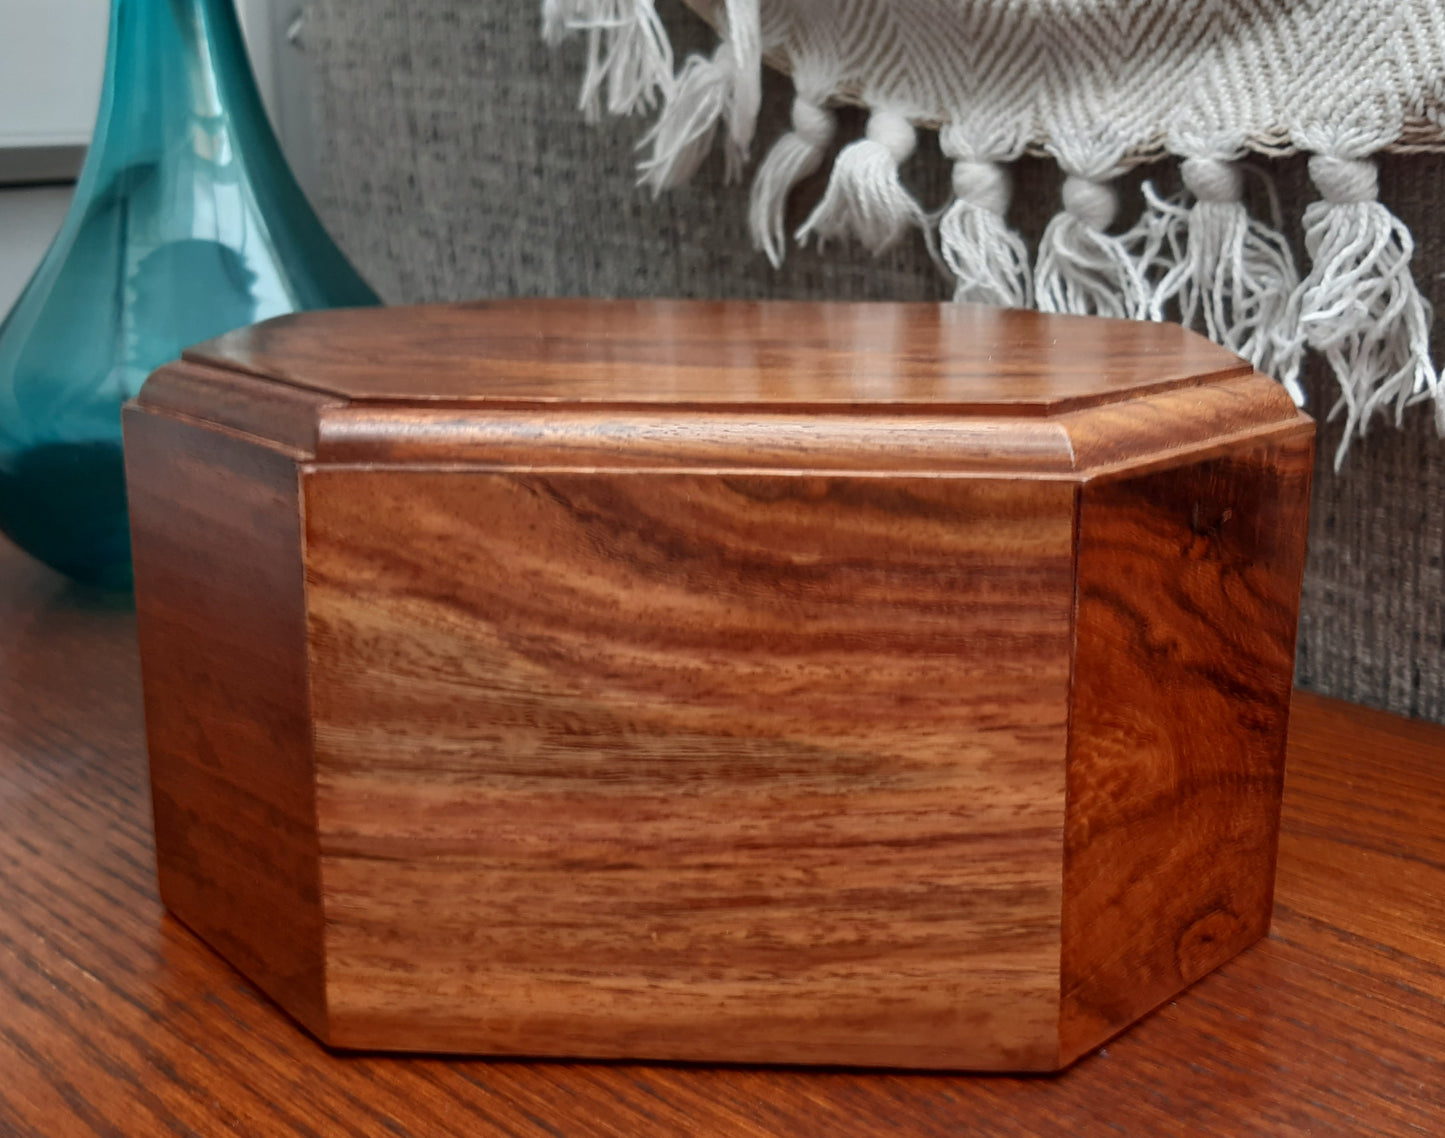 Cockerpoo Wooden Cremation Urn For Dog Ashes